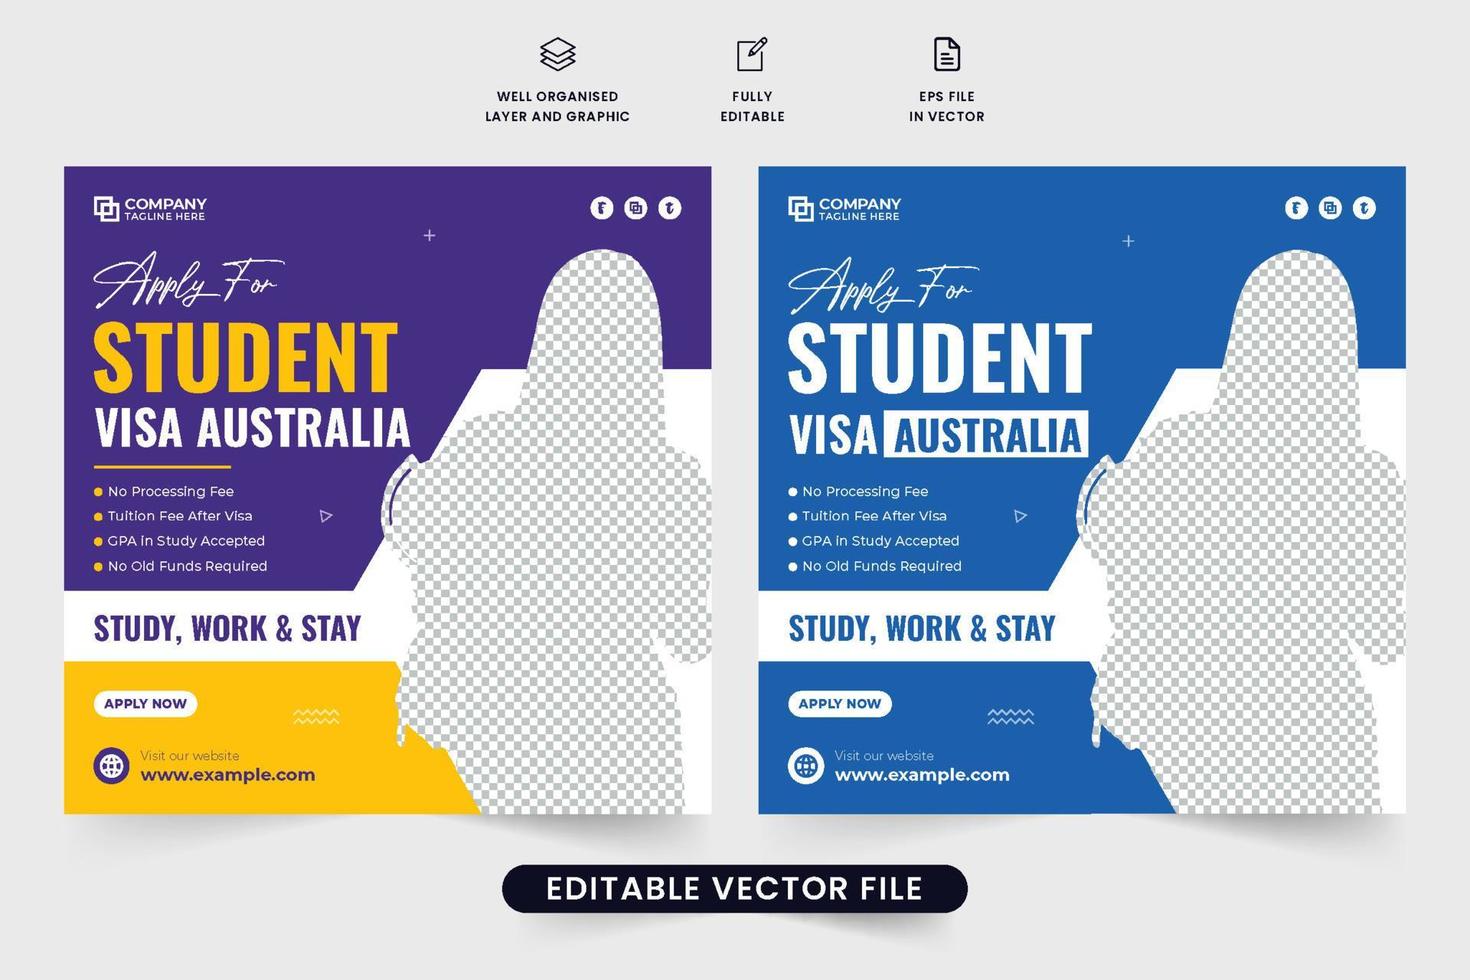 Abroad scholarship and education facilities advertisement template with purple and blue colors. Study abroad social media post vector for marketing. University admission and study web banner design.